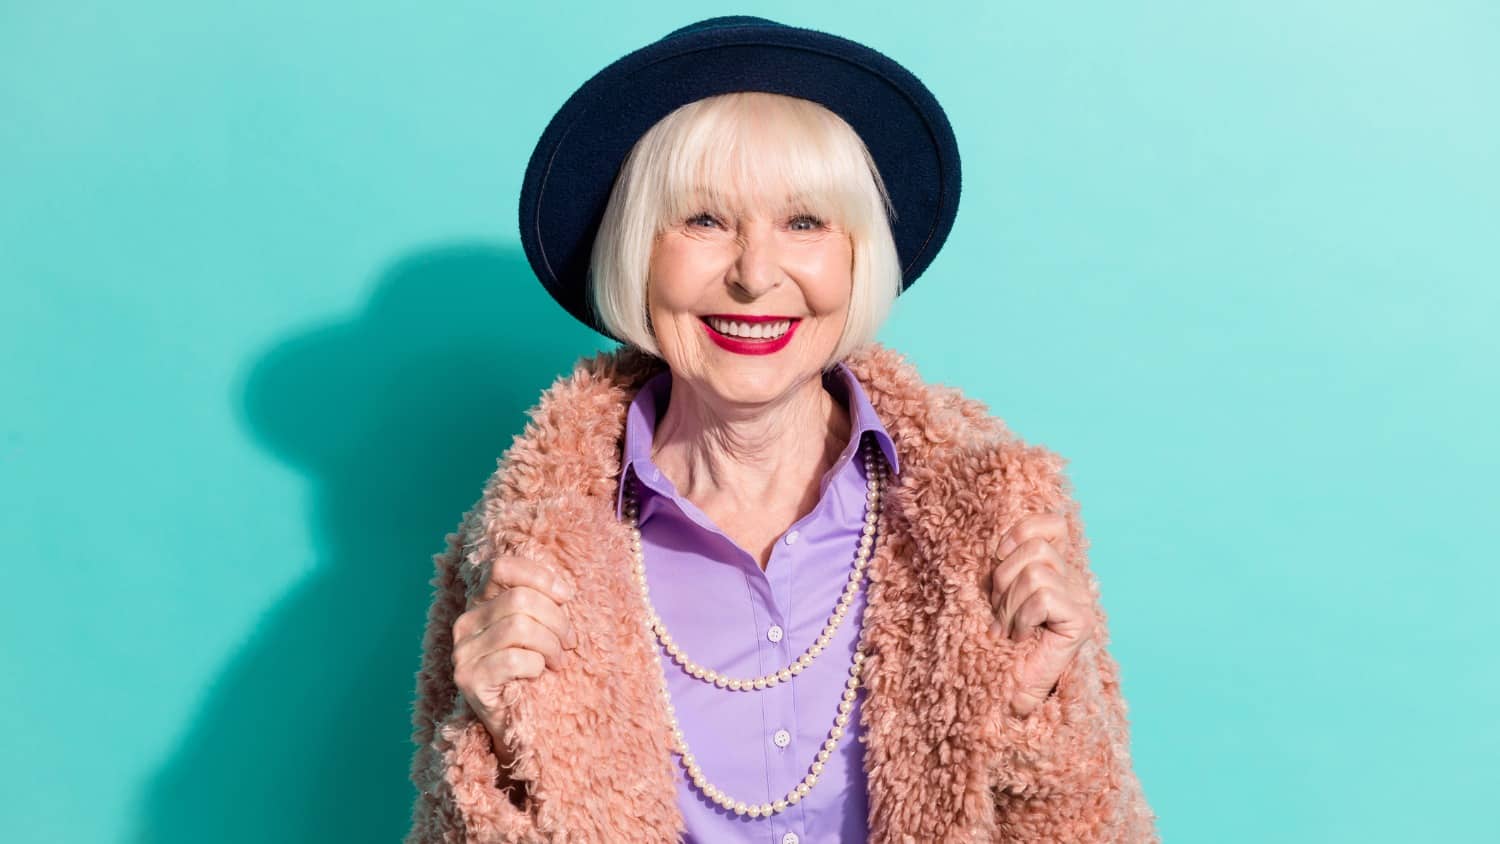 The Best Online Shopping Sites For Women Over 50